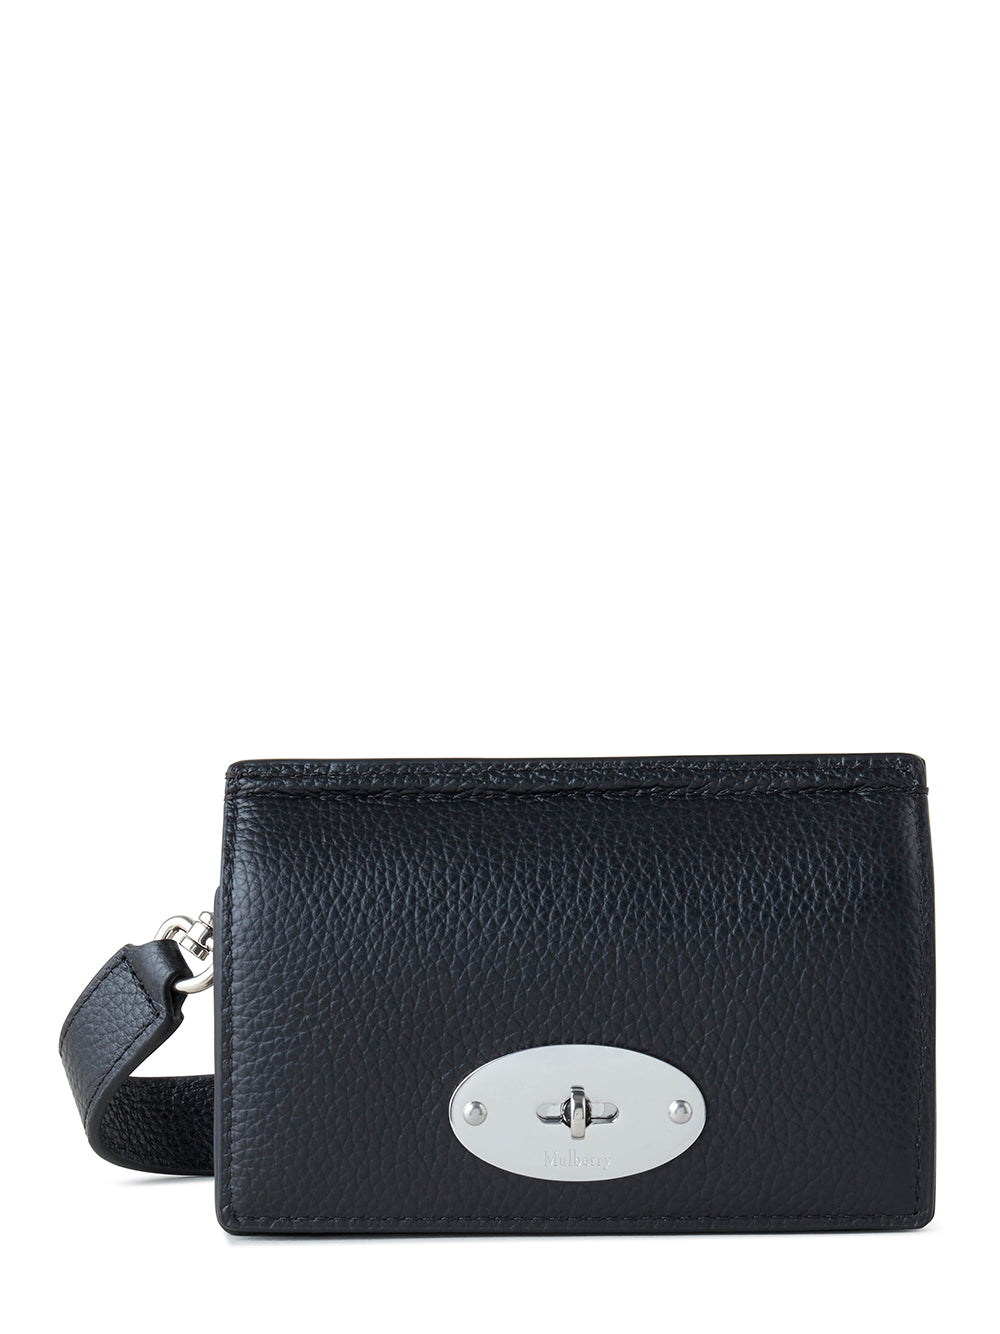 East West Antony Pouch (Black)